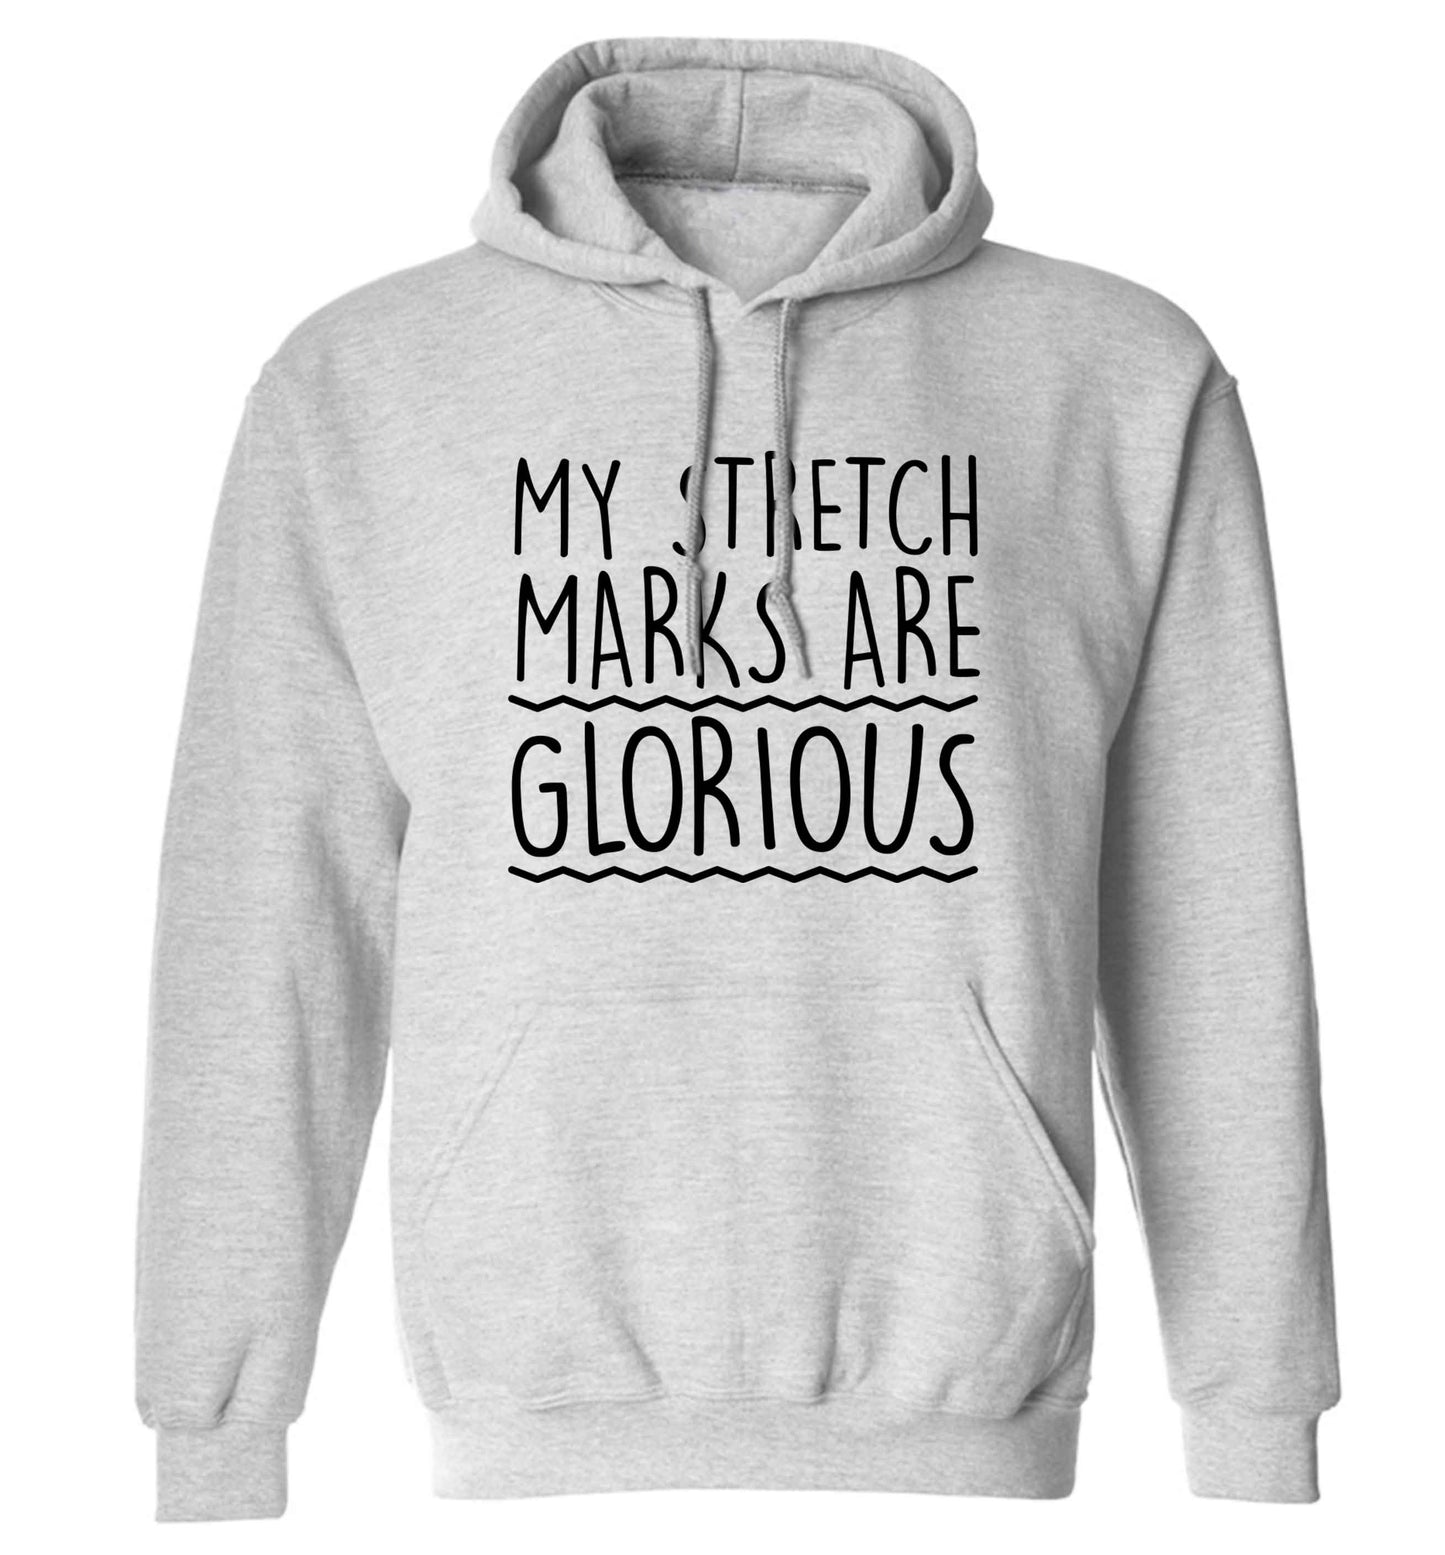 My stretch marks are glorious adults unisex grey hoodie 2XL